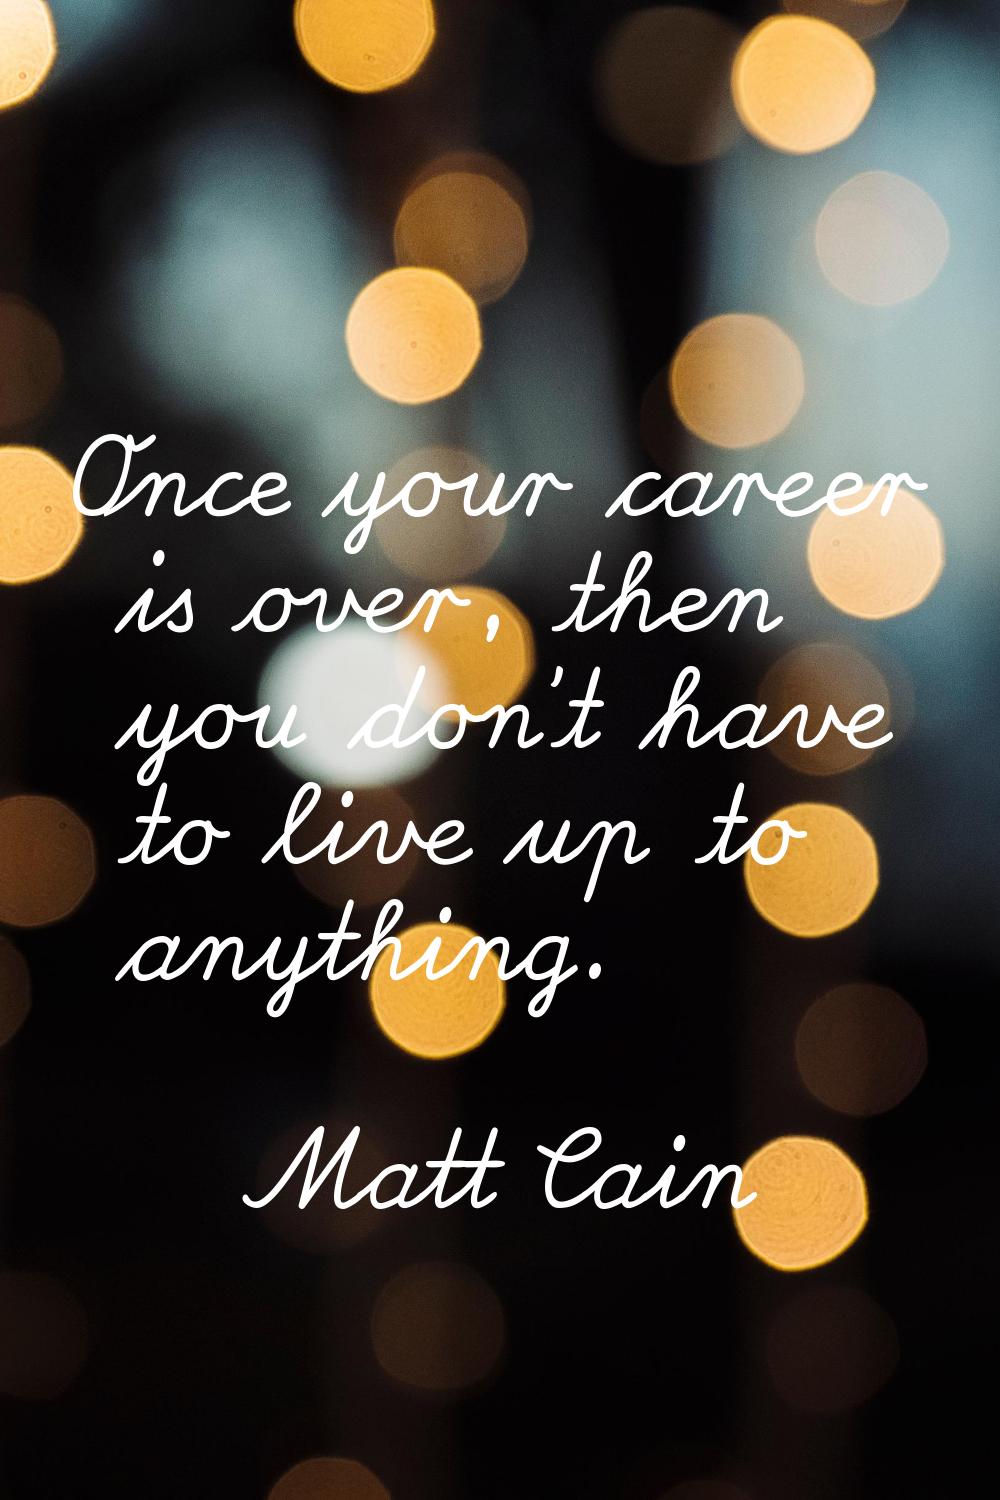 Once your career is over, then you don't have to live up to anything.